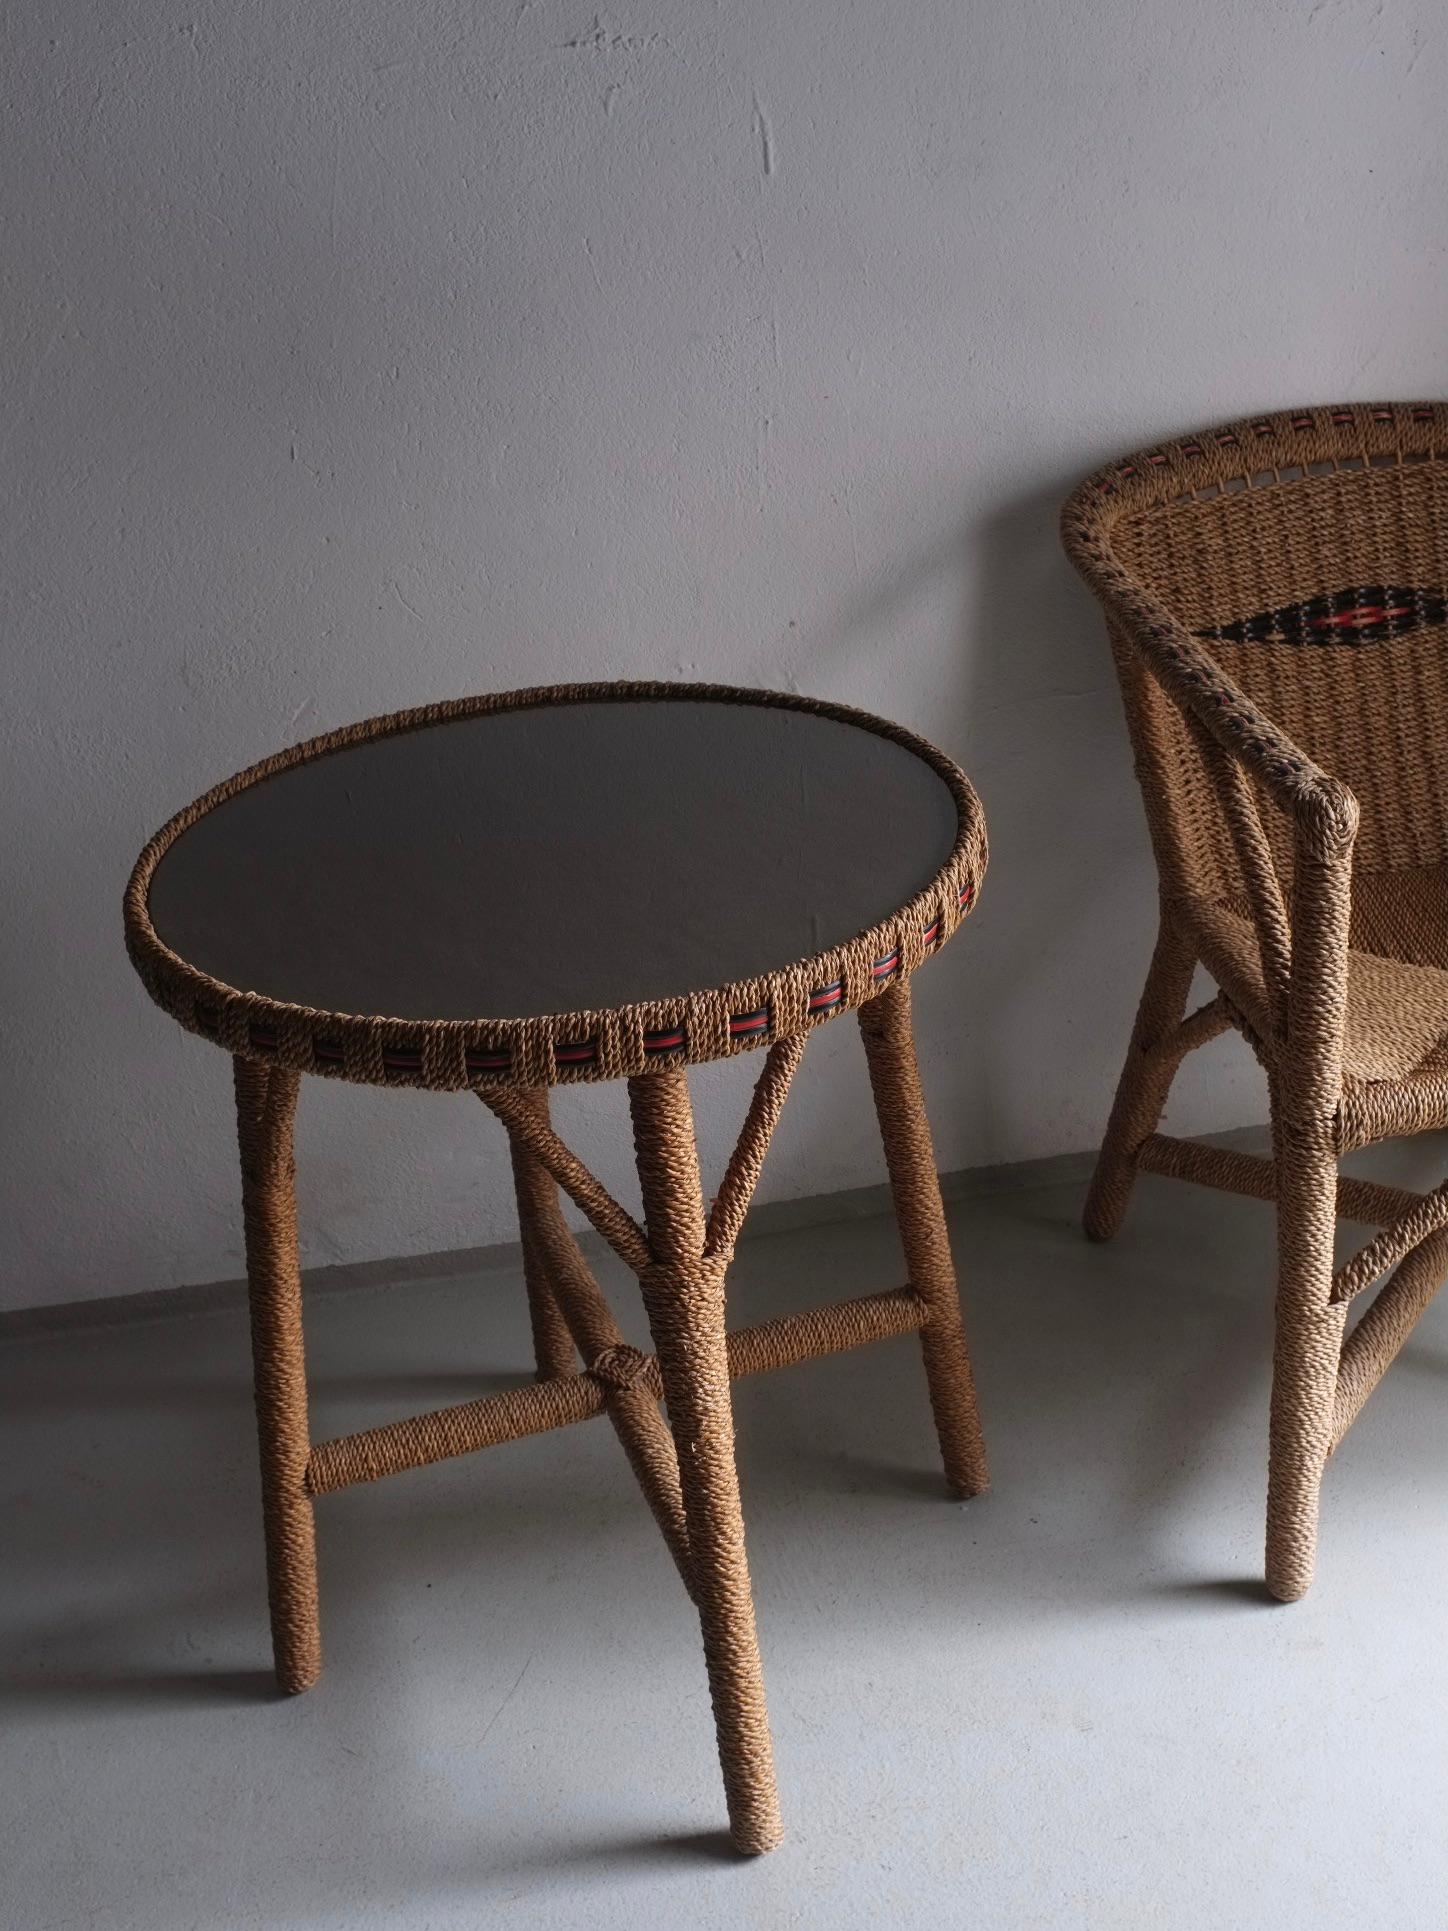 French Woven Wicker Furniture Set Patio Garden, France 1970s For Sale